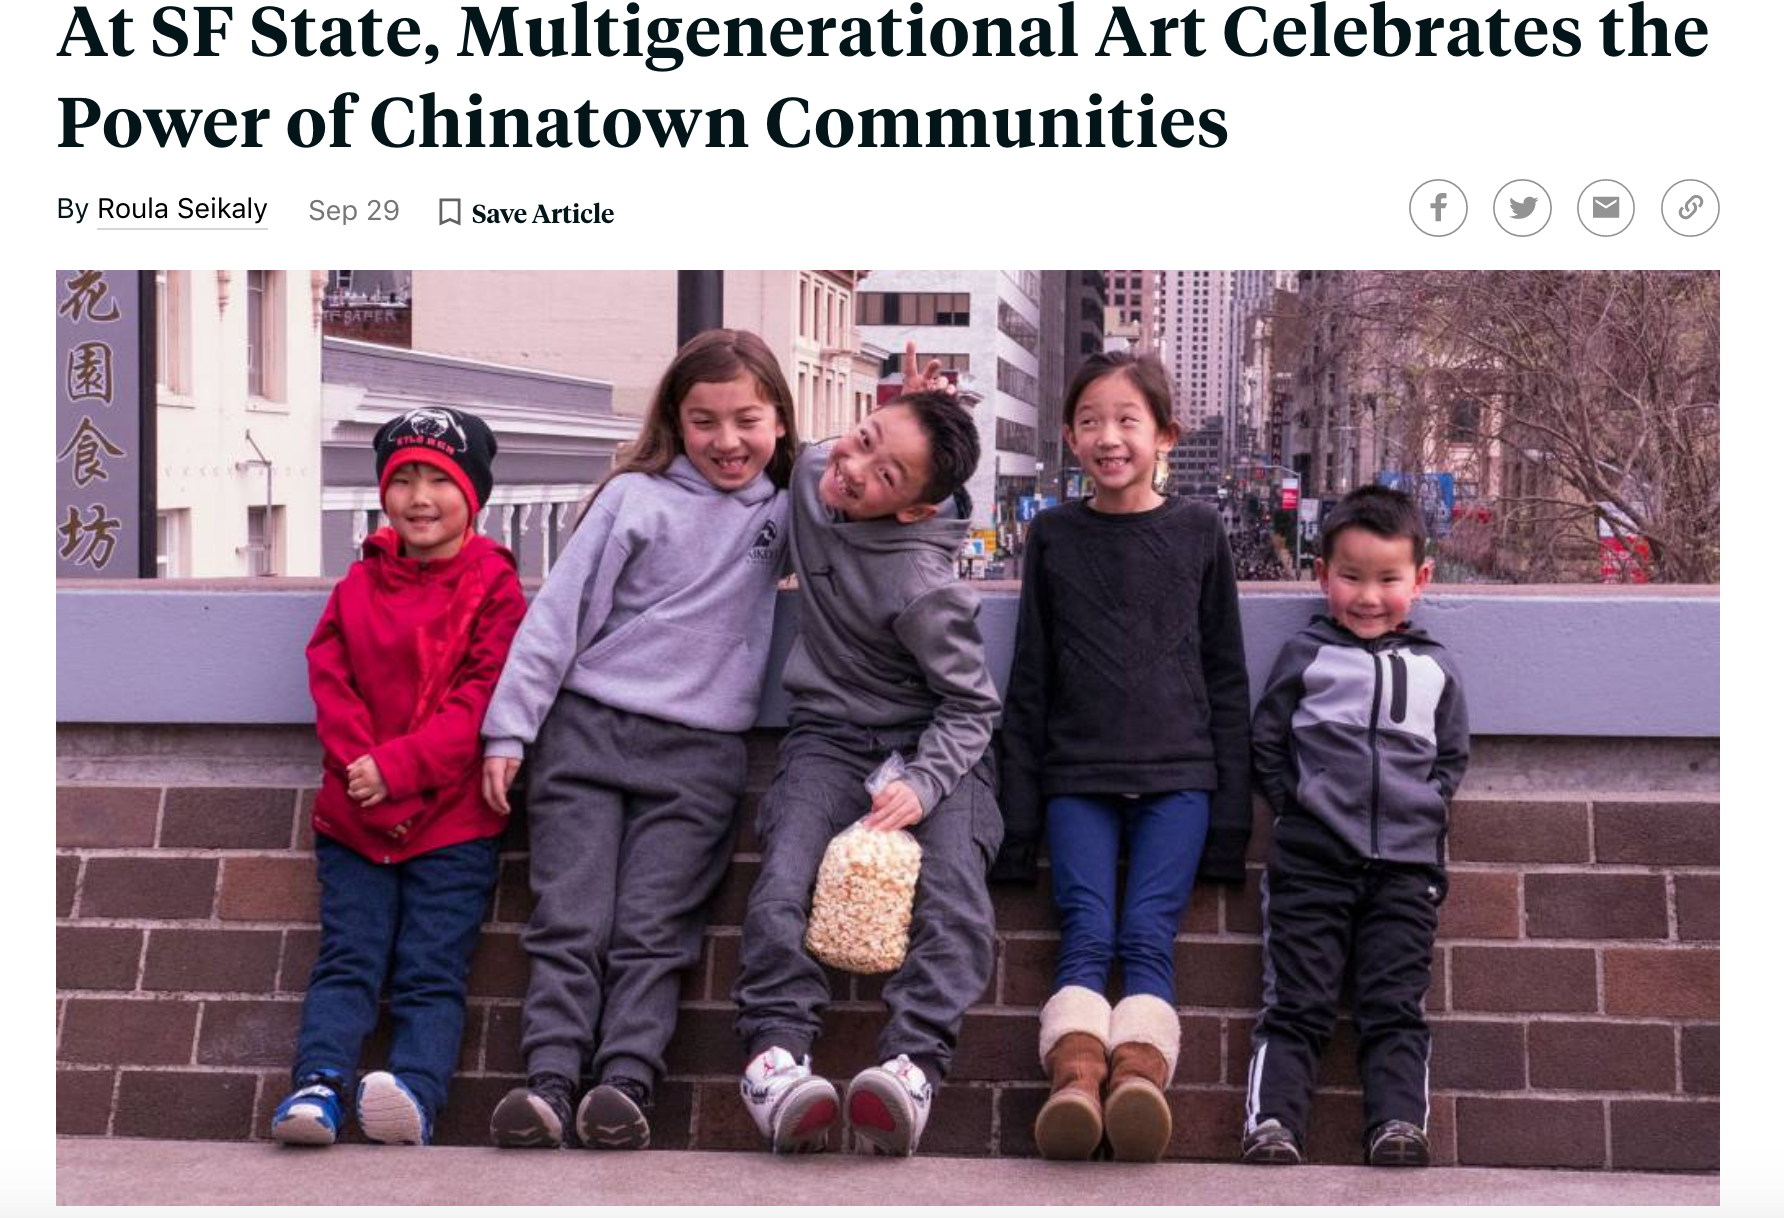 At SF State, Multigenerational Art Celebrates the Power of Chinatown Communities, by Roula Seikaly